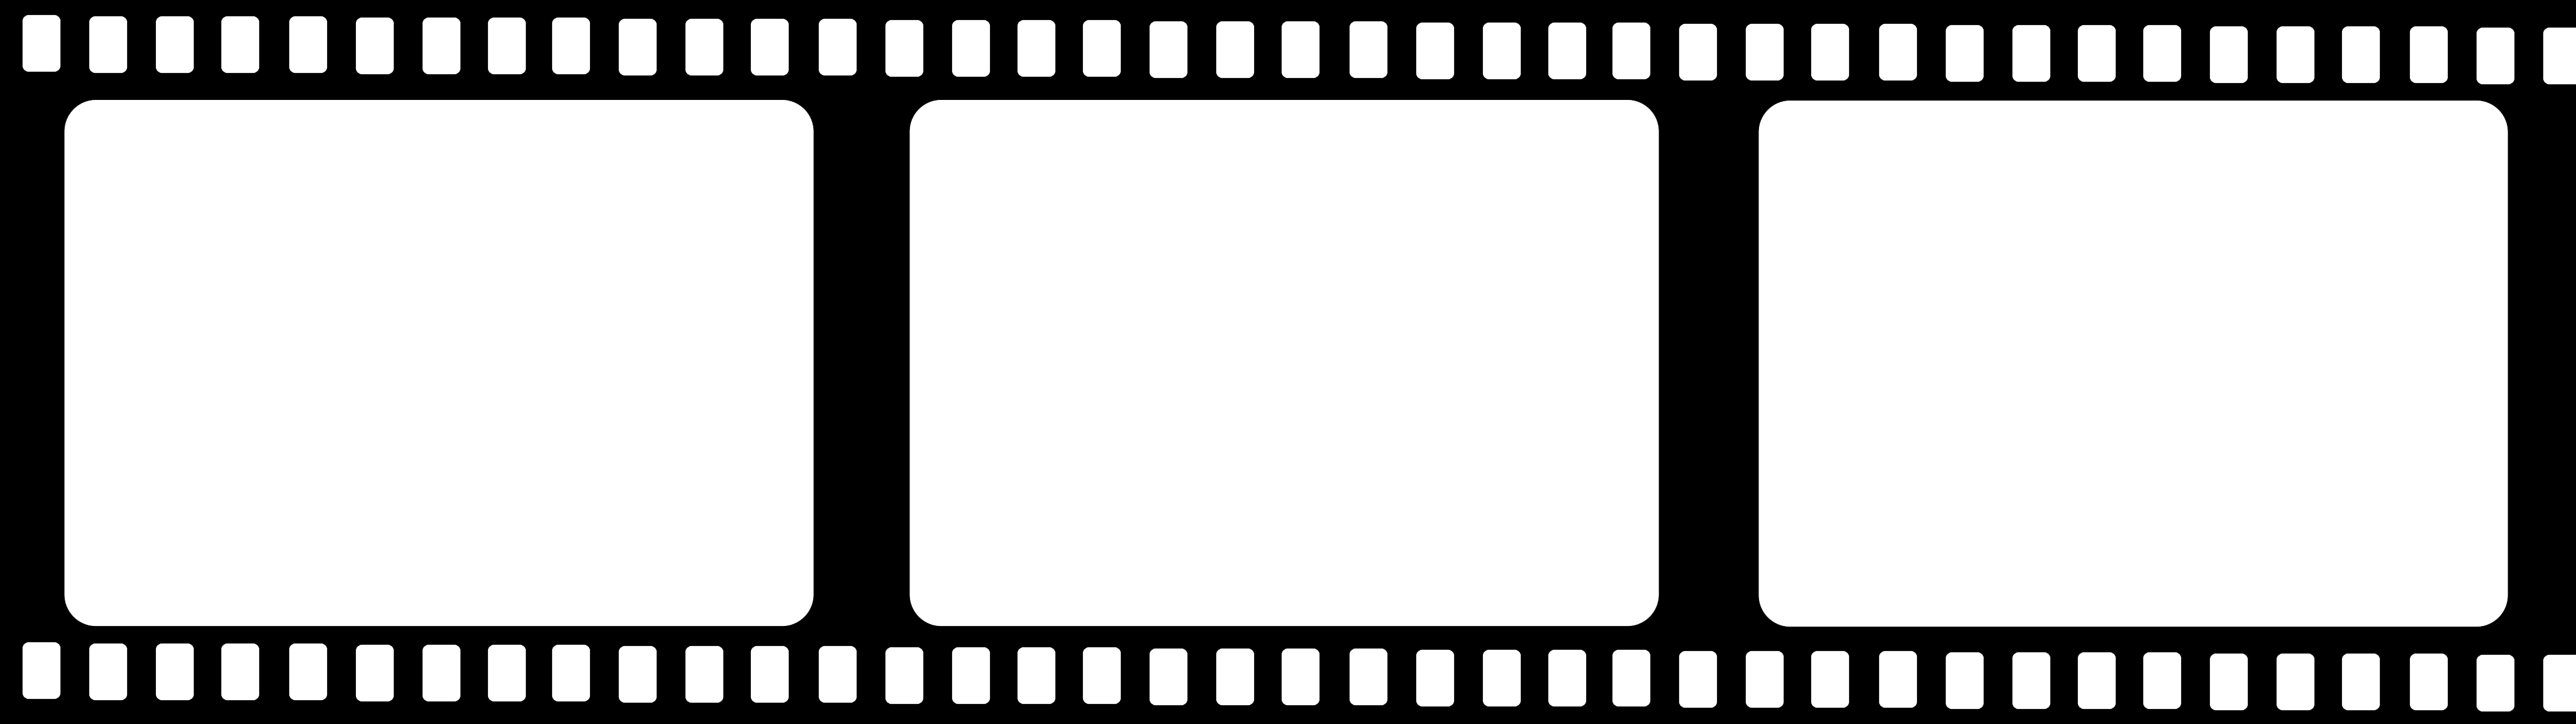 Film Silhouette PNG HD Quality